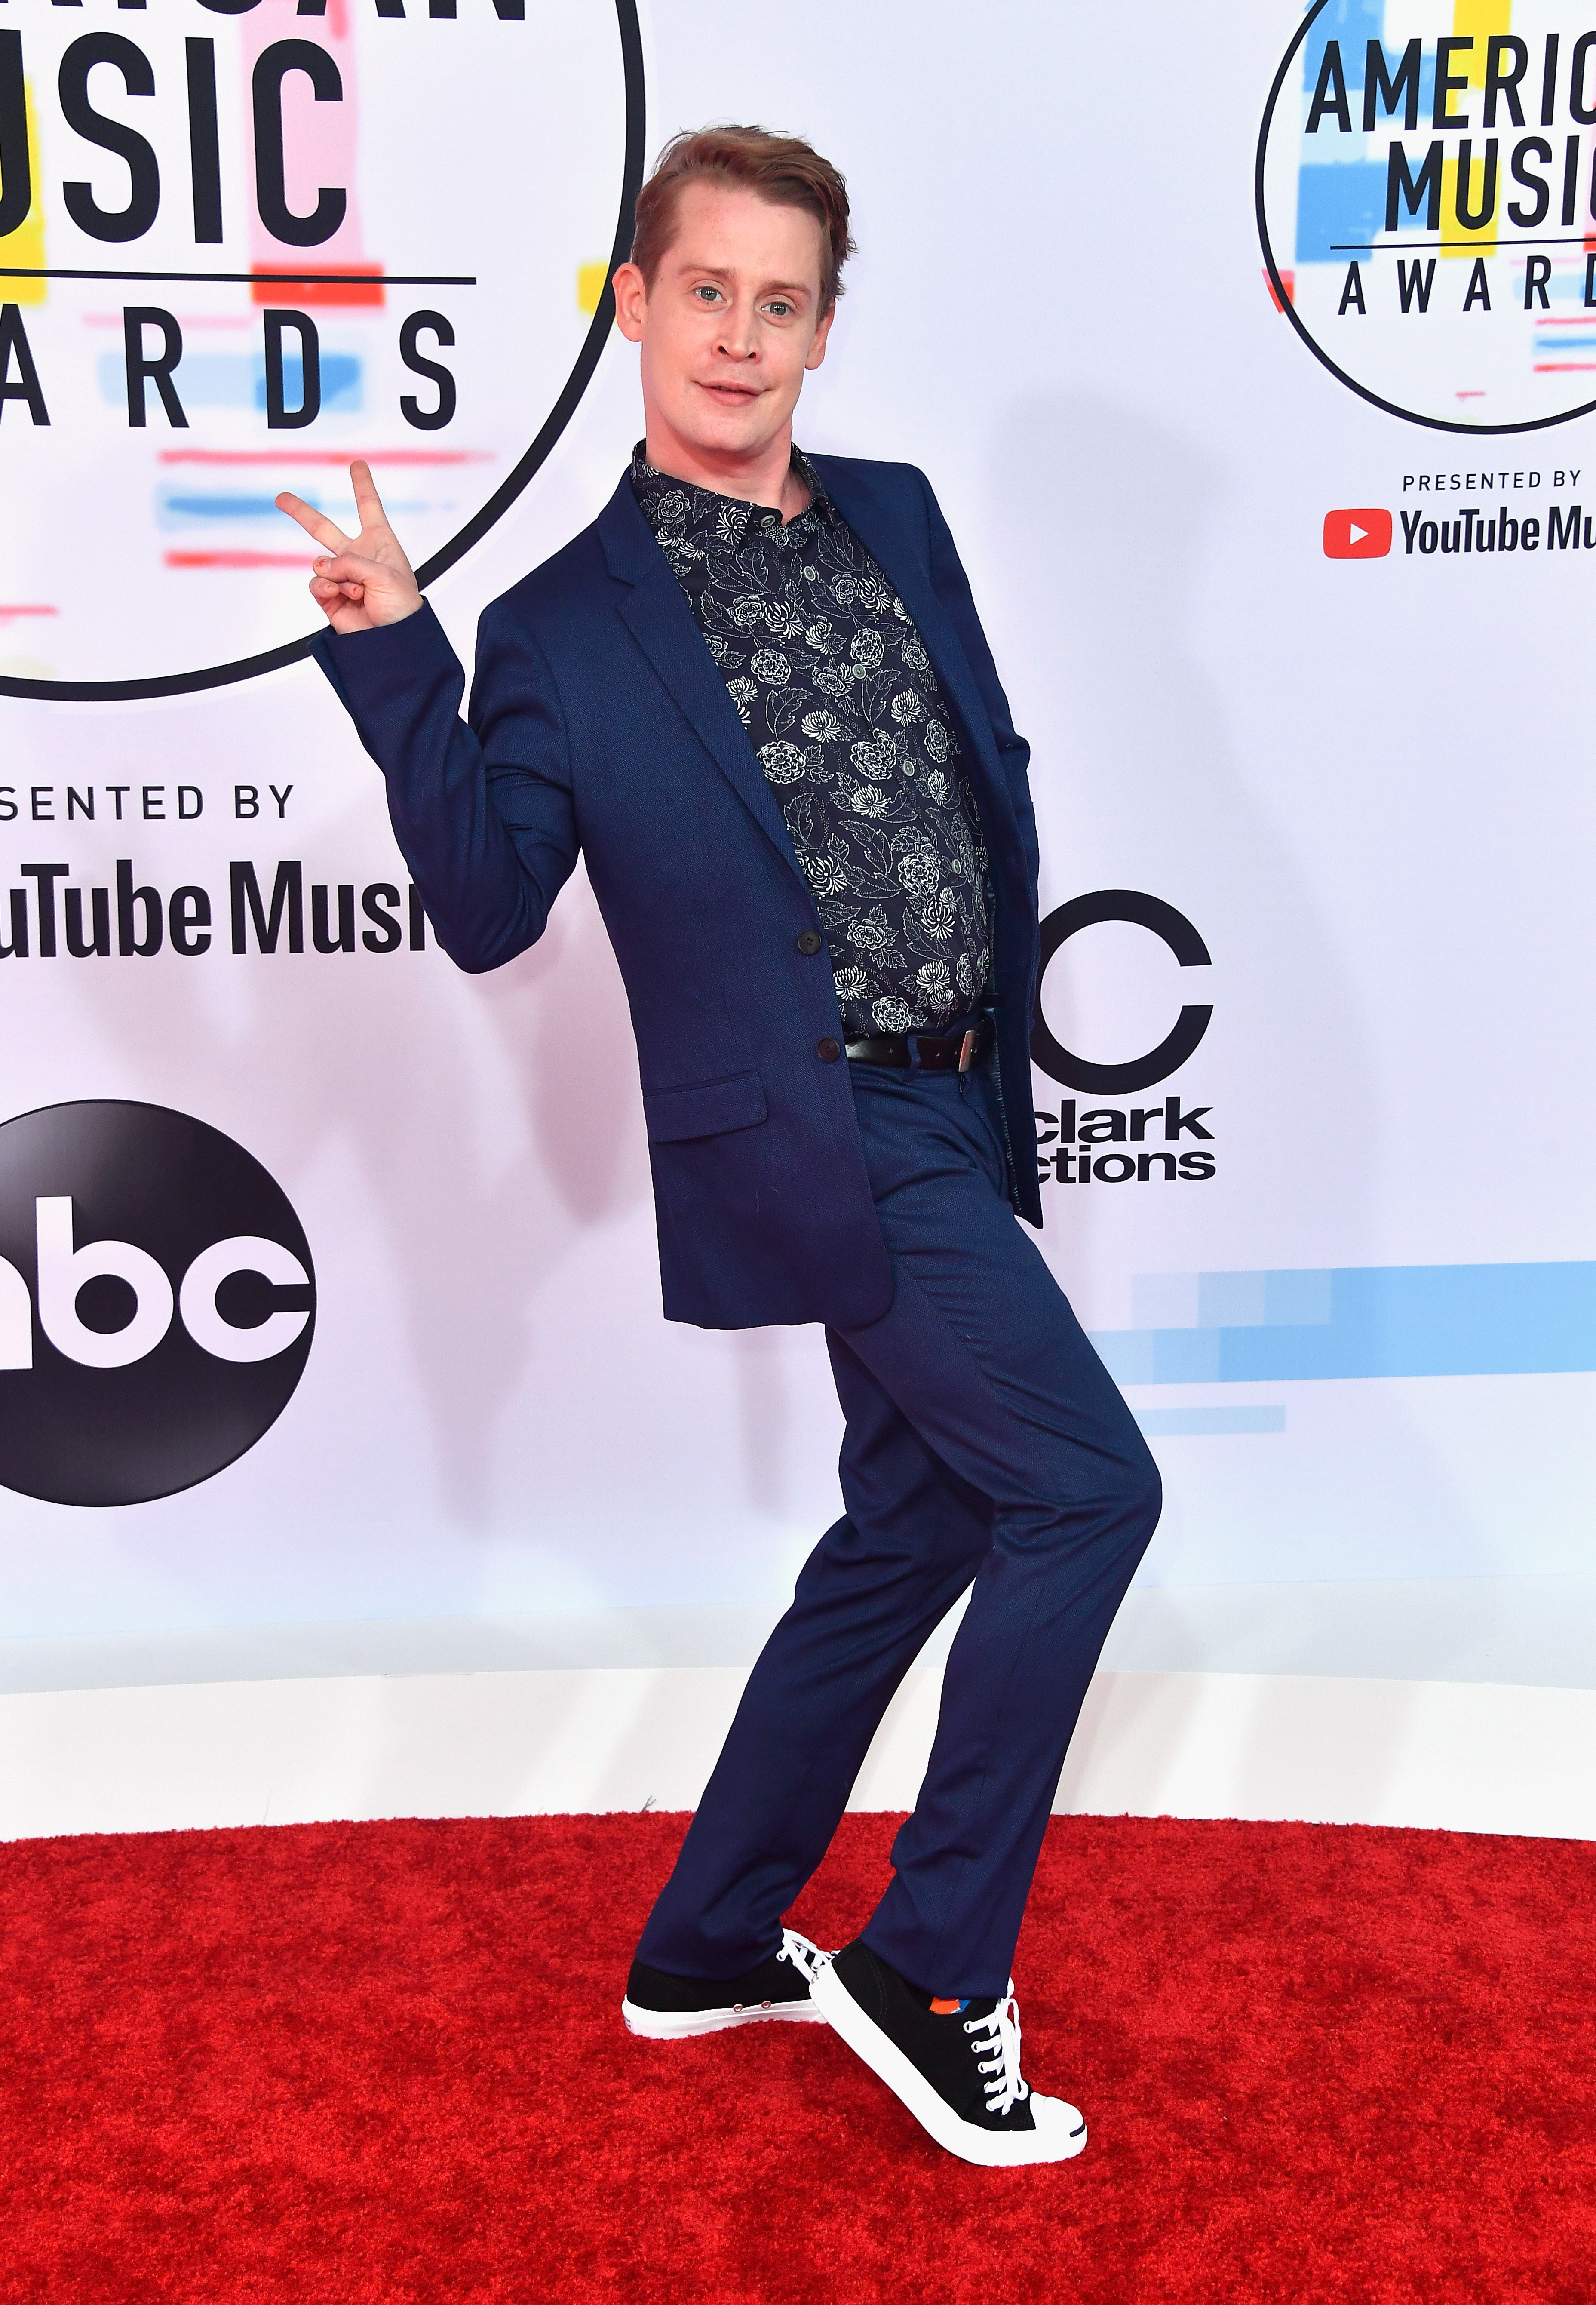 Macaulay Culkin at the American Music Awards in Los Angeles, California on October 9, 2018 | Source: Getty Images